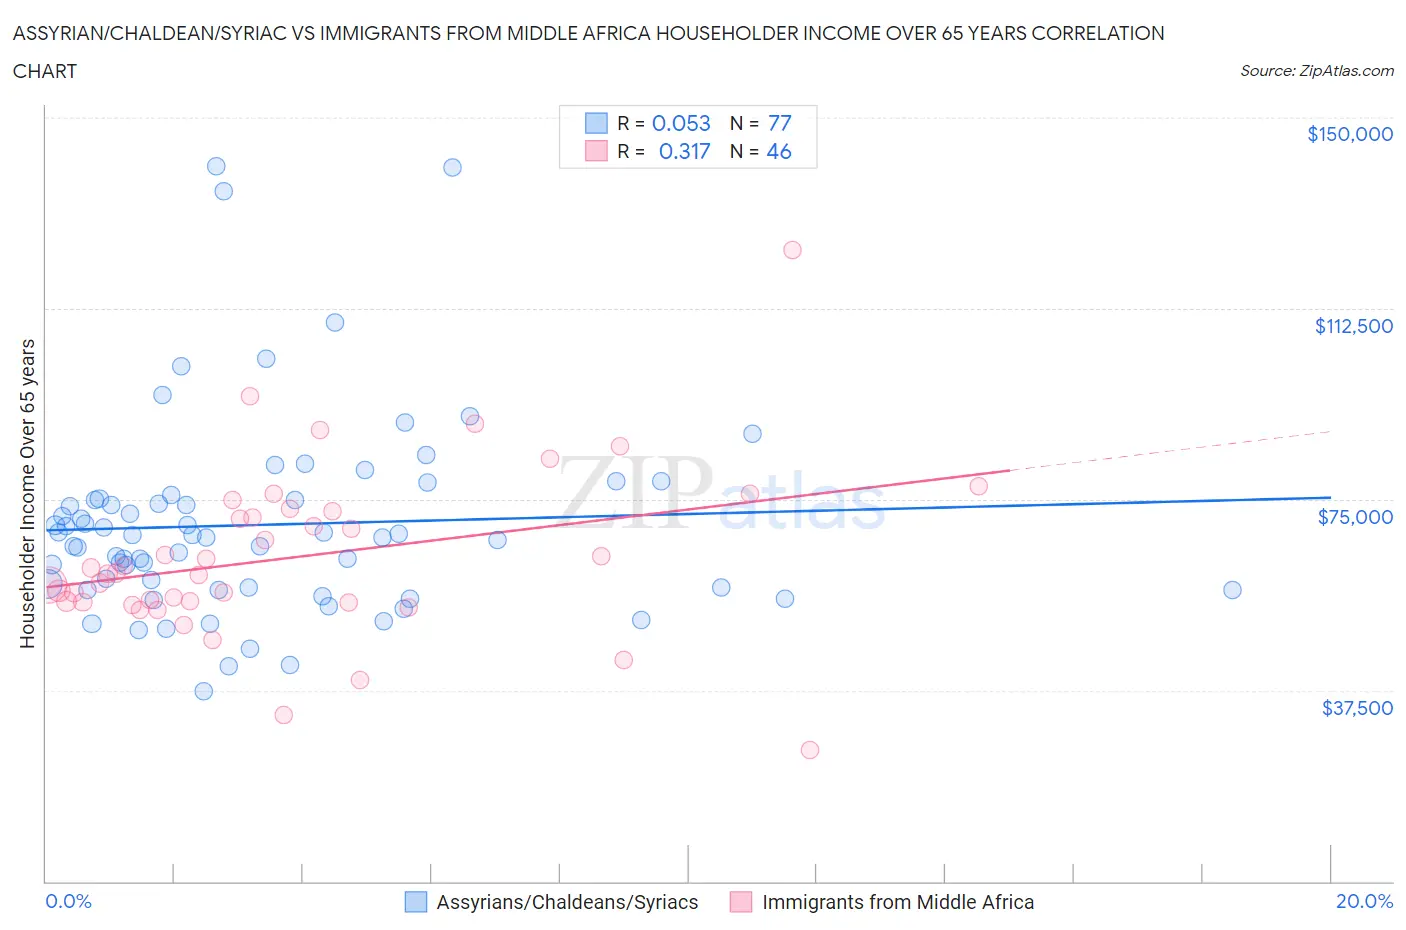 Assyrian/Chaldean/Syriac vs Immigrants from Middle Africa Householder Income Over 65 years